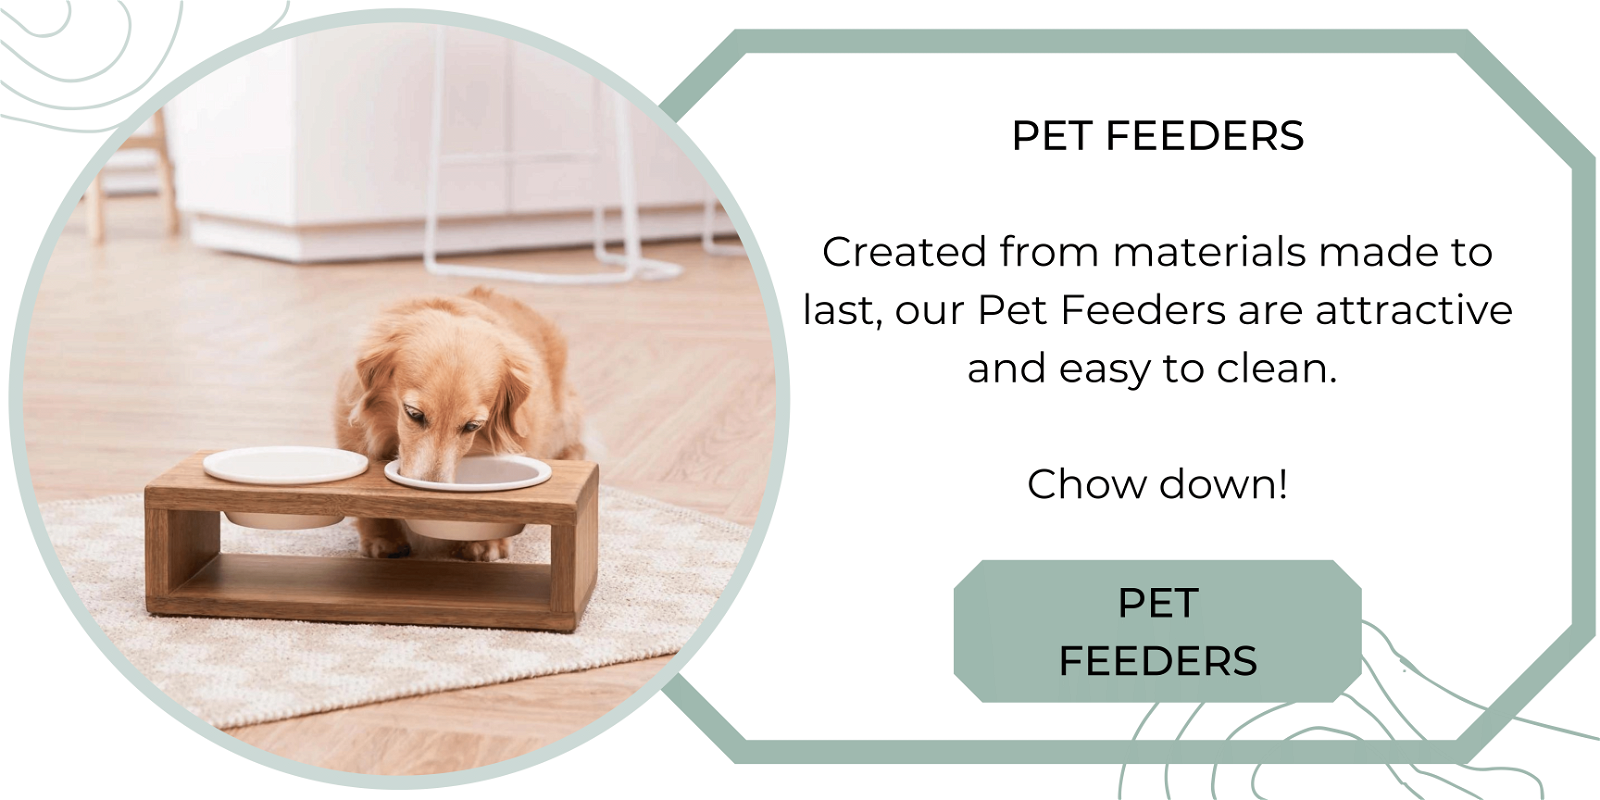 Created from materials made to last, our Pet Feeders are attractive and easy to clean. Chow down!